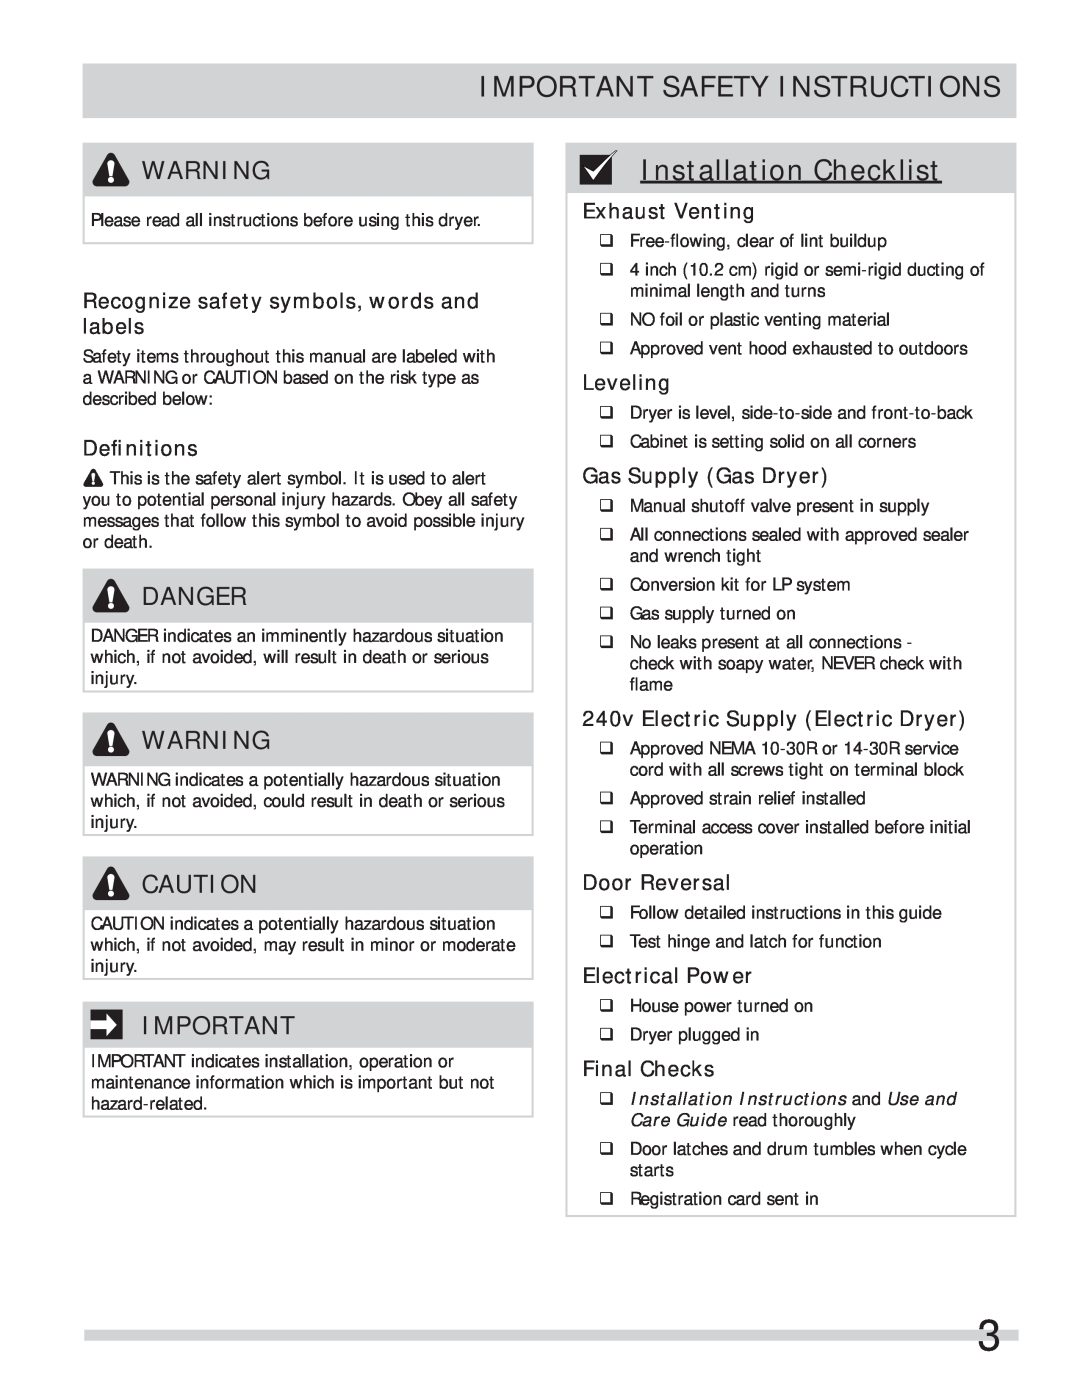 Frigidaire 137134900B Installation Checklist, Danger, Recognize safety symbols, words and labels, Deﬁnitions, Leveling 